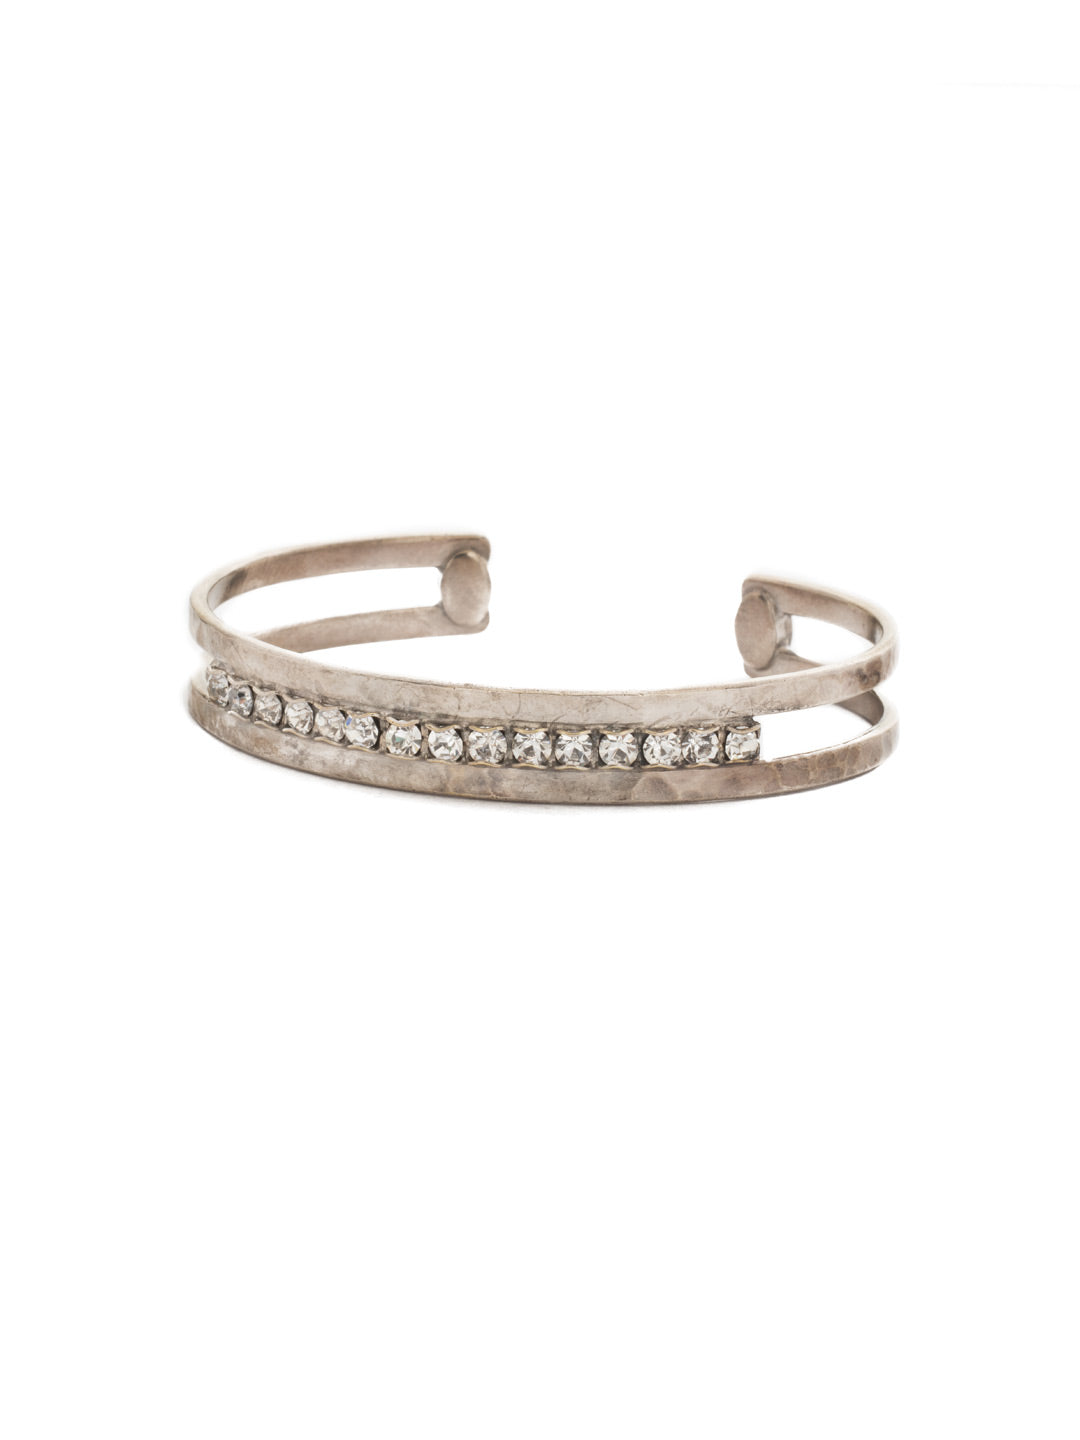 Product Image: Hammered Metal Cuff Bracelet